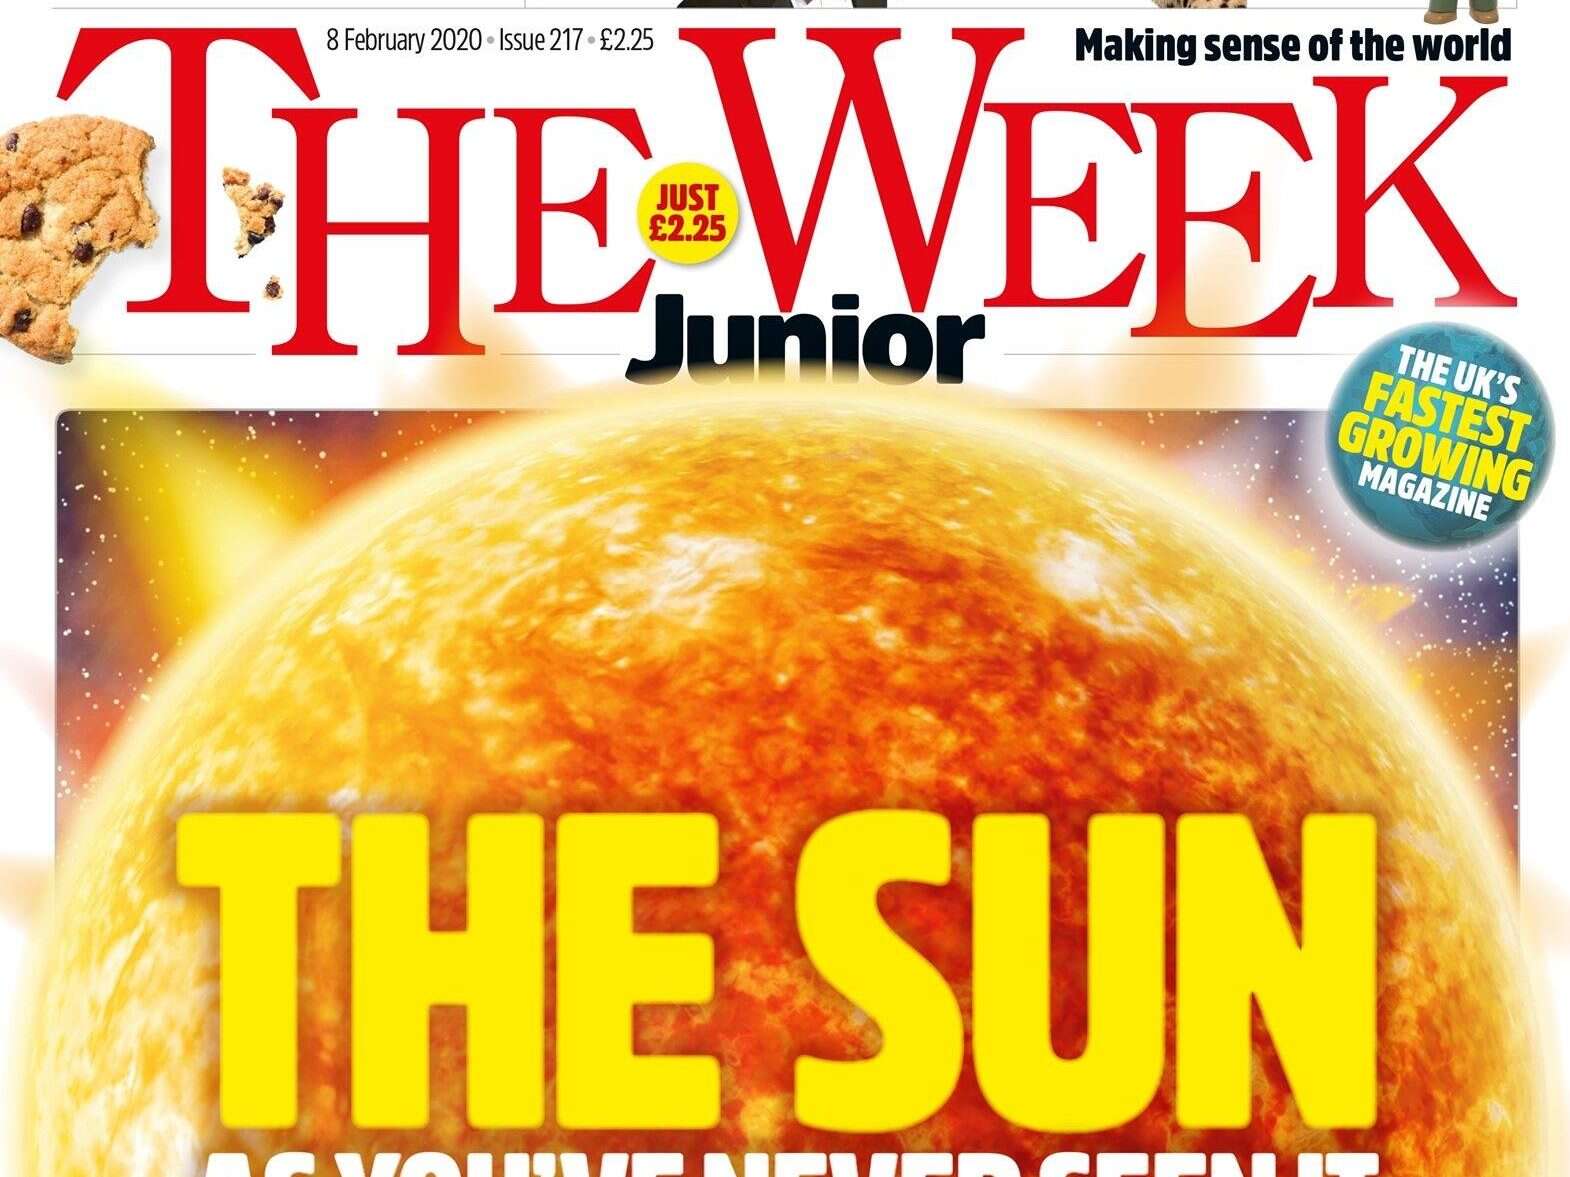 News mag ABCs: The Week Junior grows by a fifth as Private Eye and New Statesman sales up